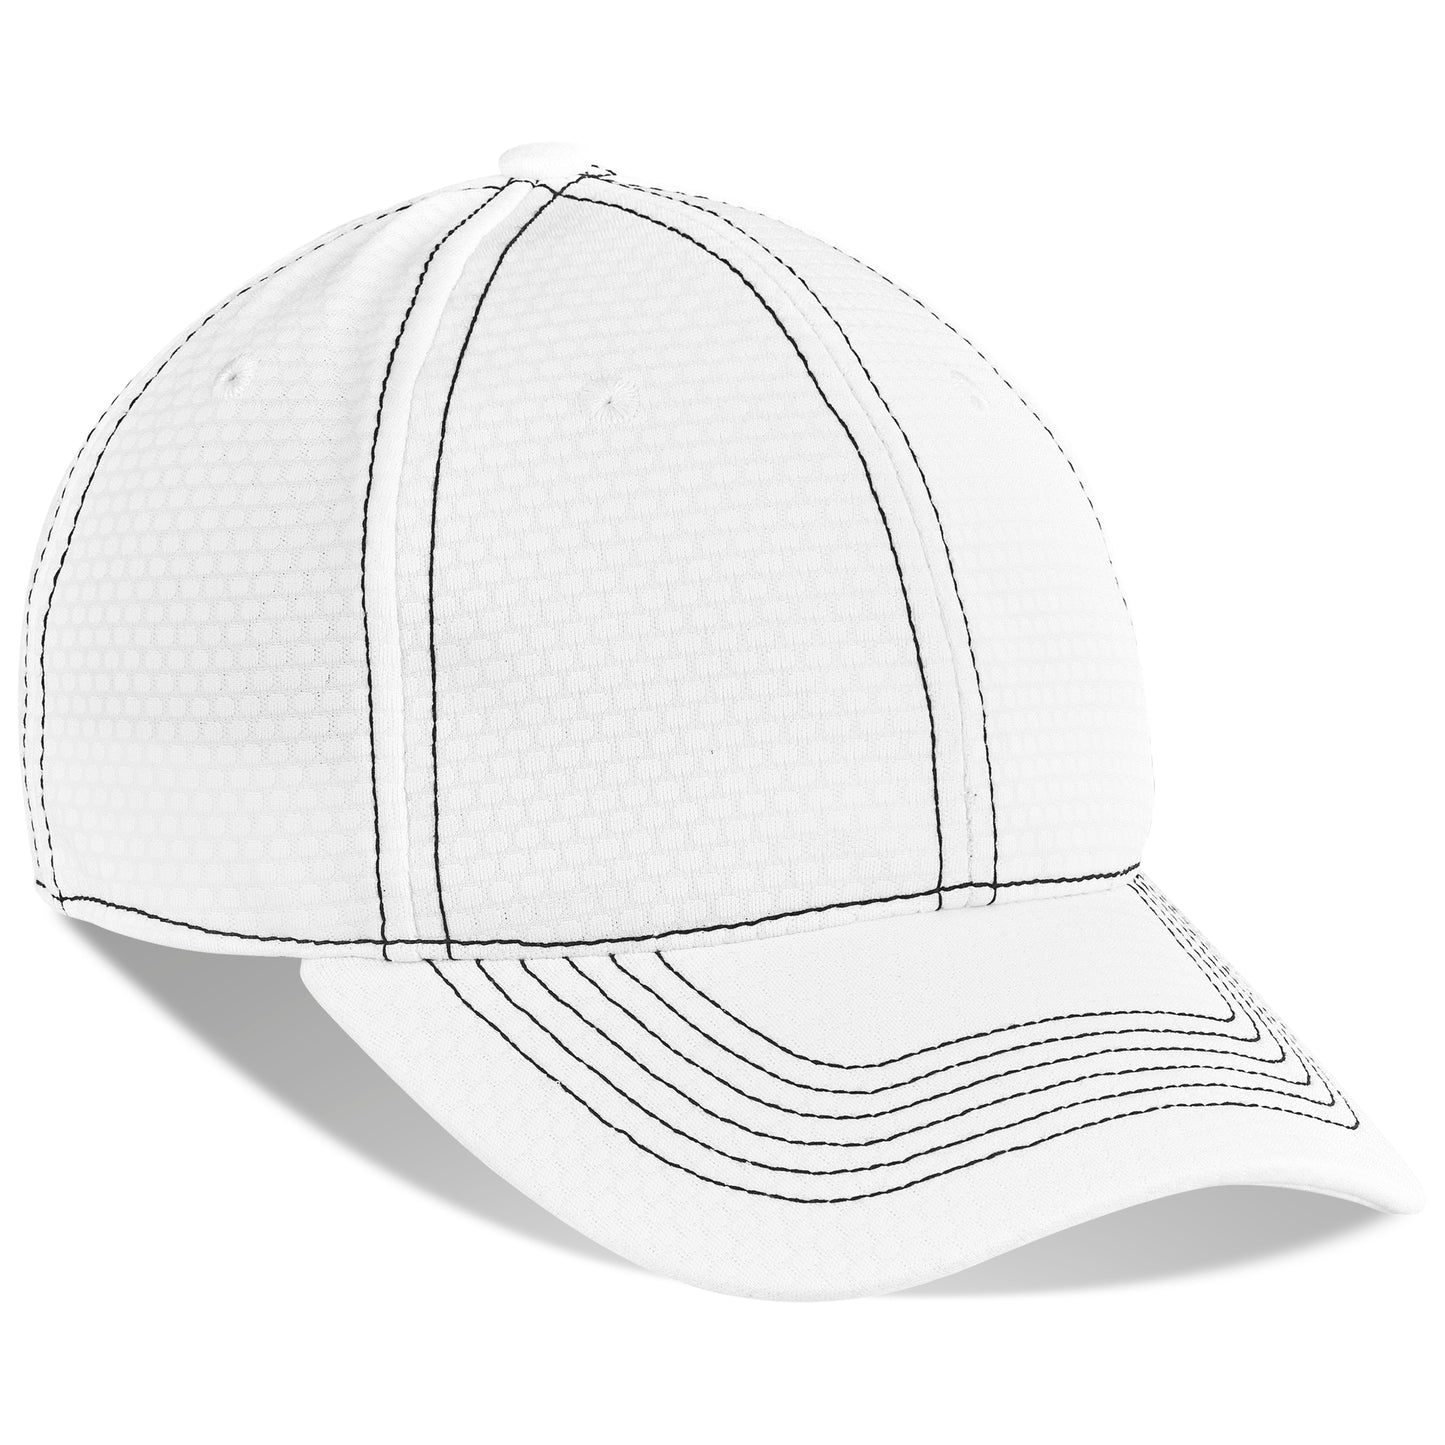 Augusta Fitted Cap - 6 Panel